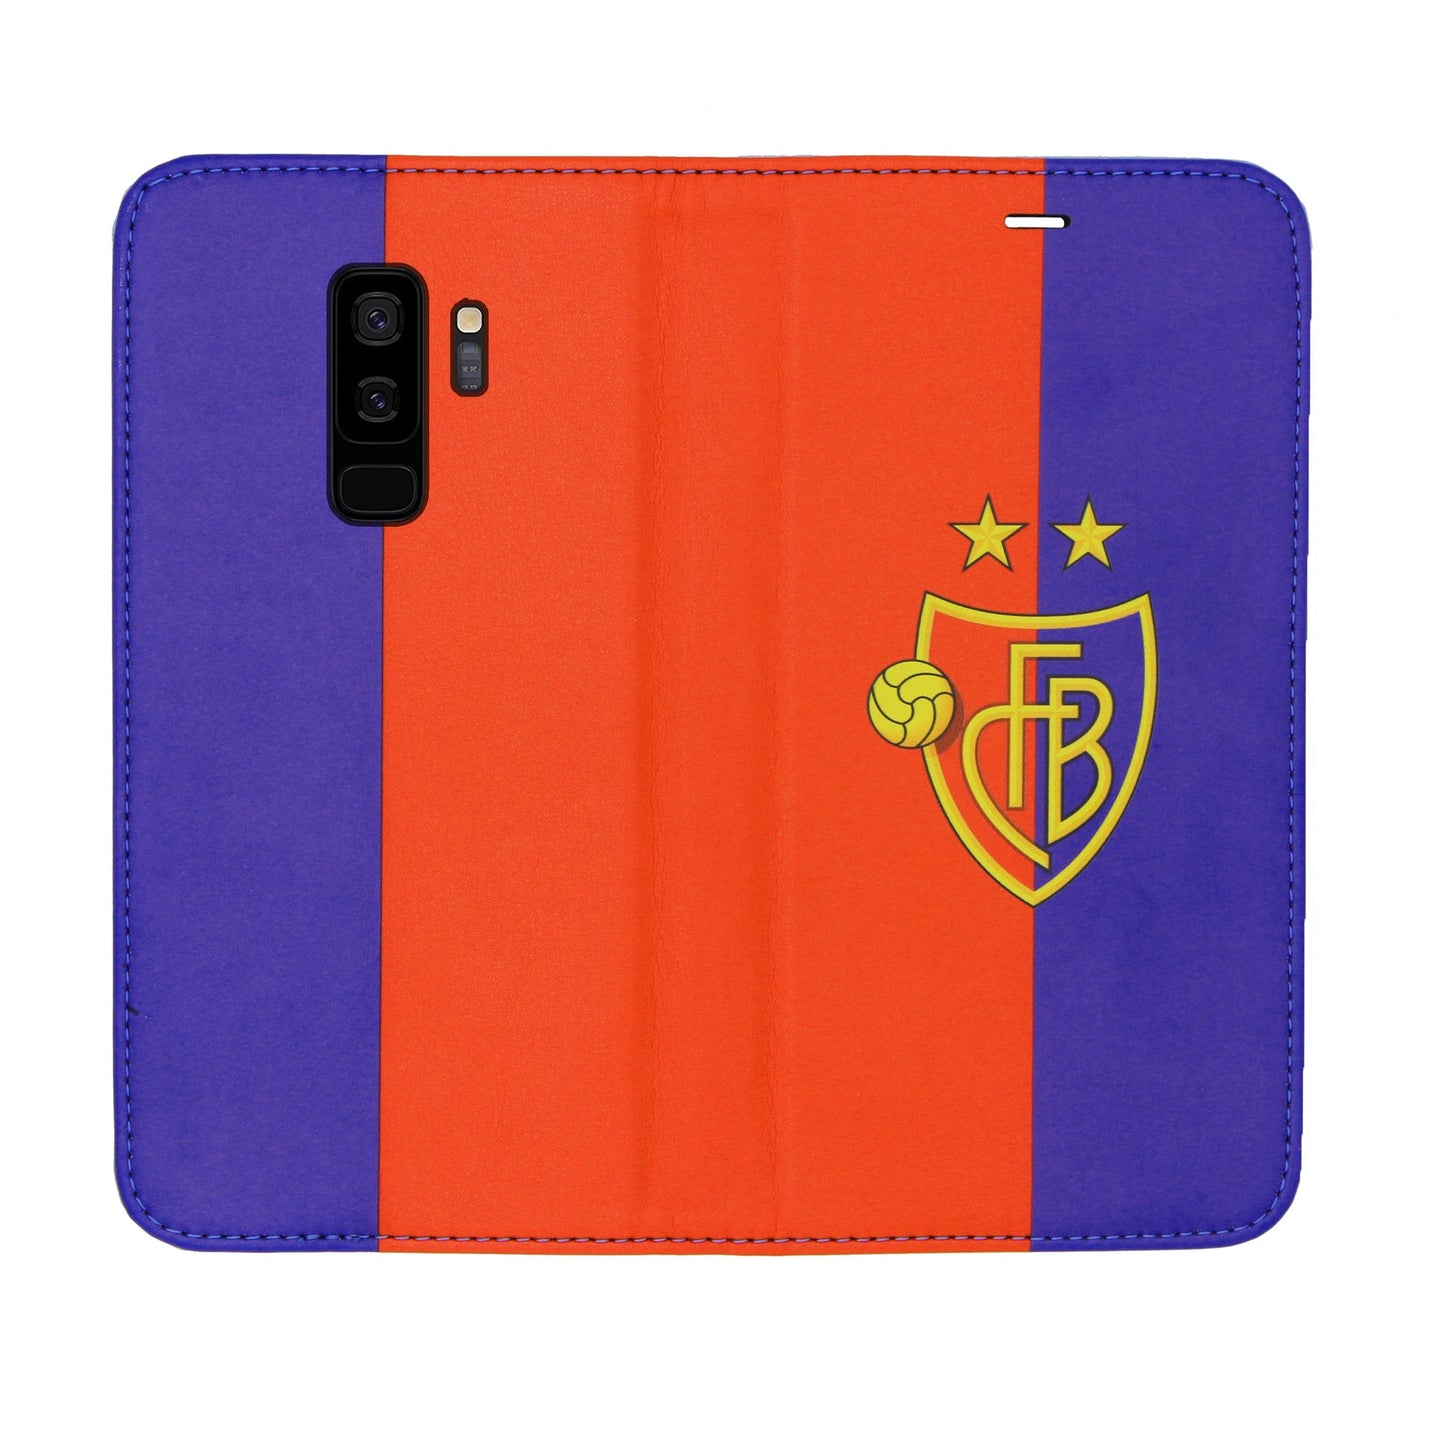 FCB red / blue panoramic case for the Samsung Galaxy S9 Plus